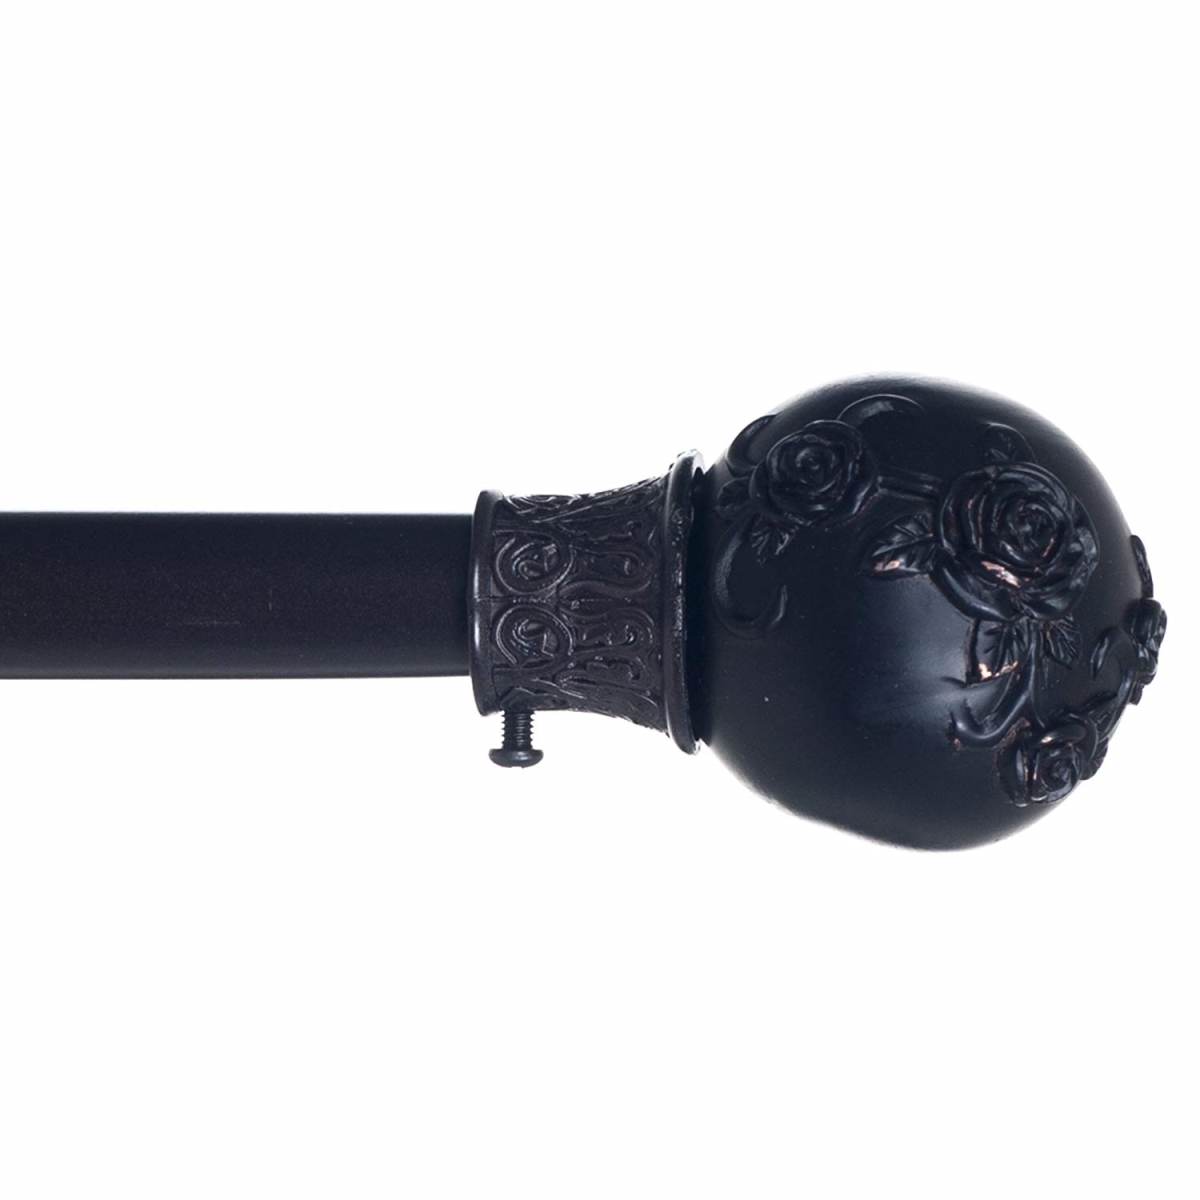 63a-77675 Floral Ball Curtain Rod, Rubbed Bronze - 0.75 In.